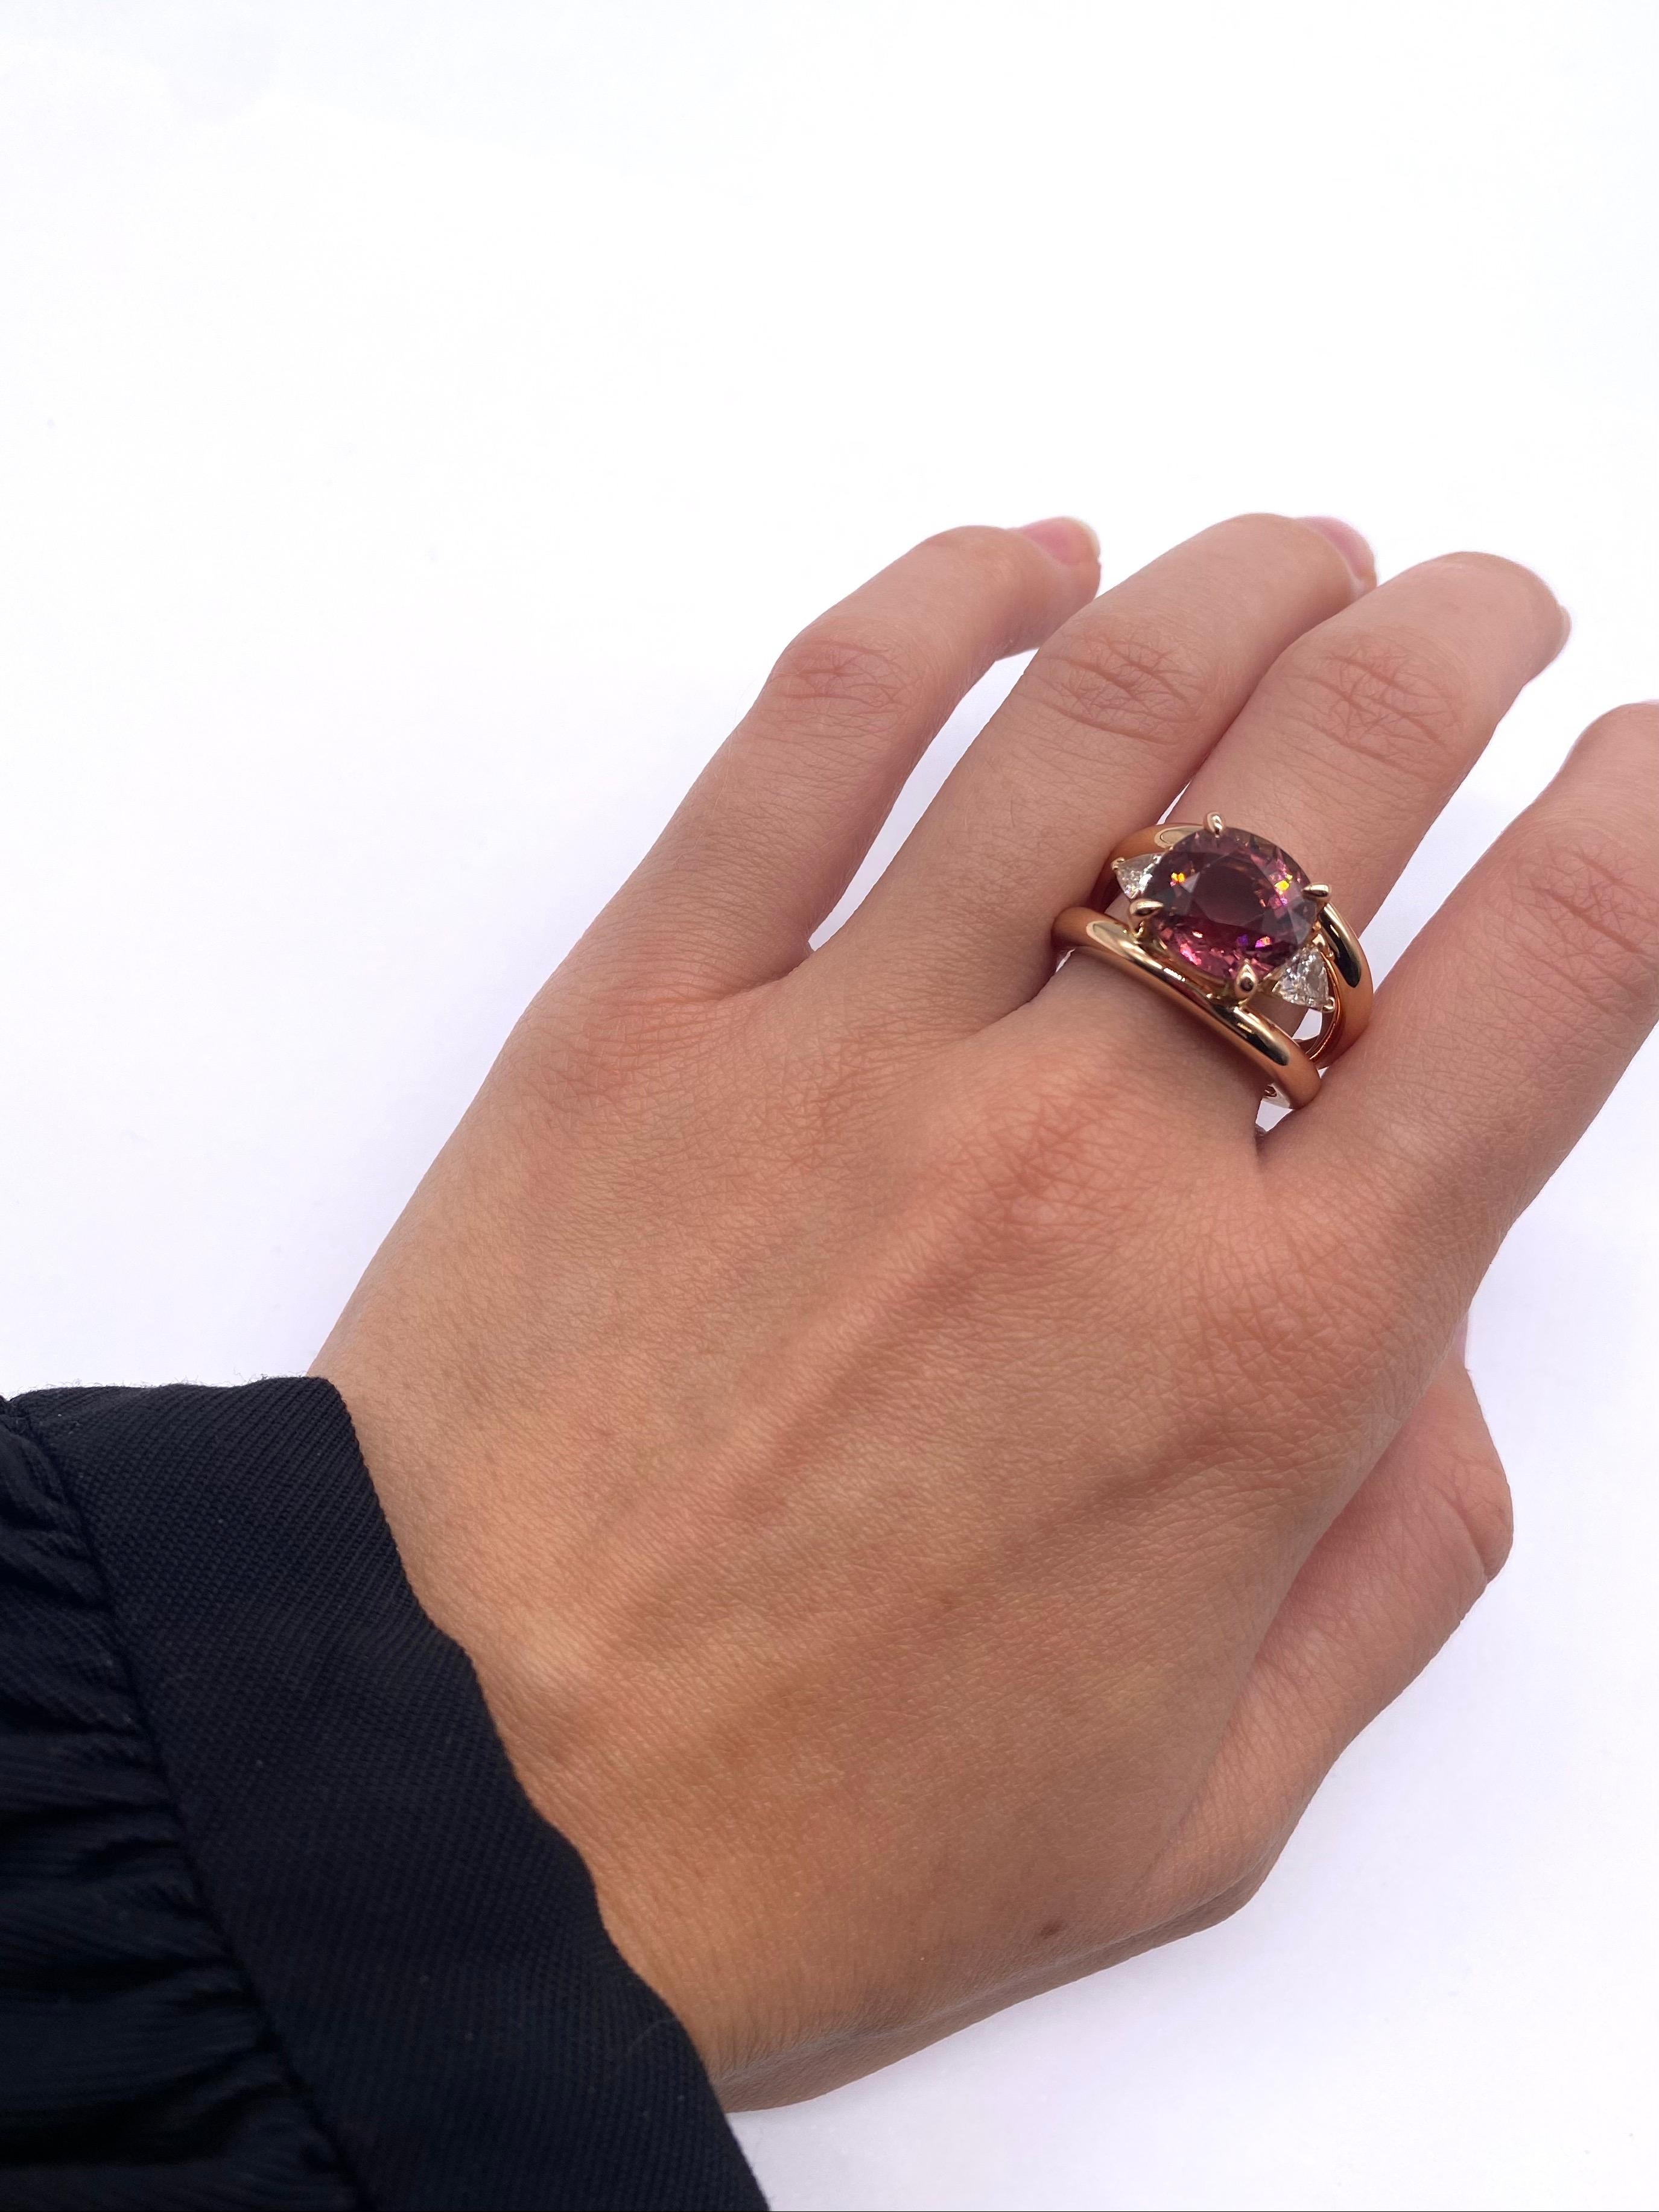 Women's French Ring in Pink Gold Topped with a Pink Tourmaline and 2 Diamonds Troïda For Sale